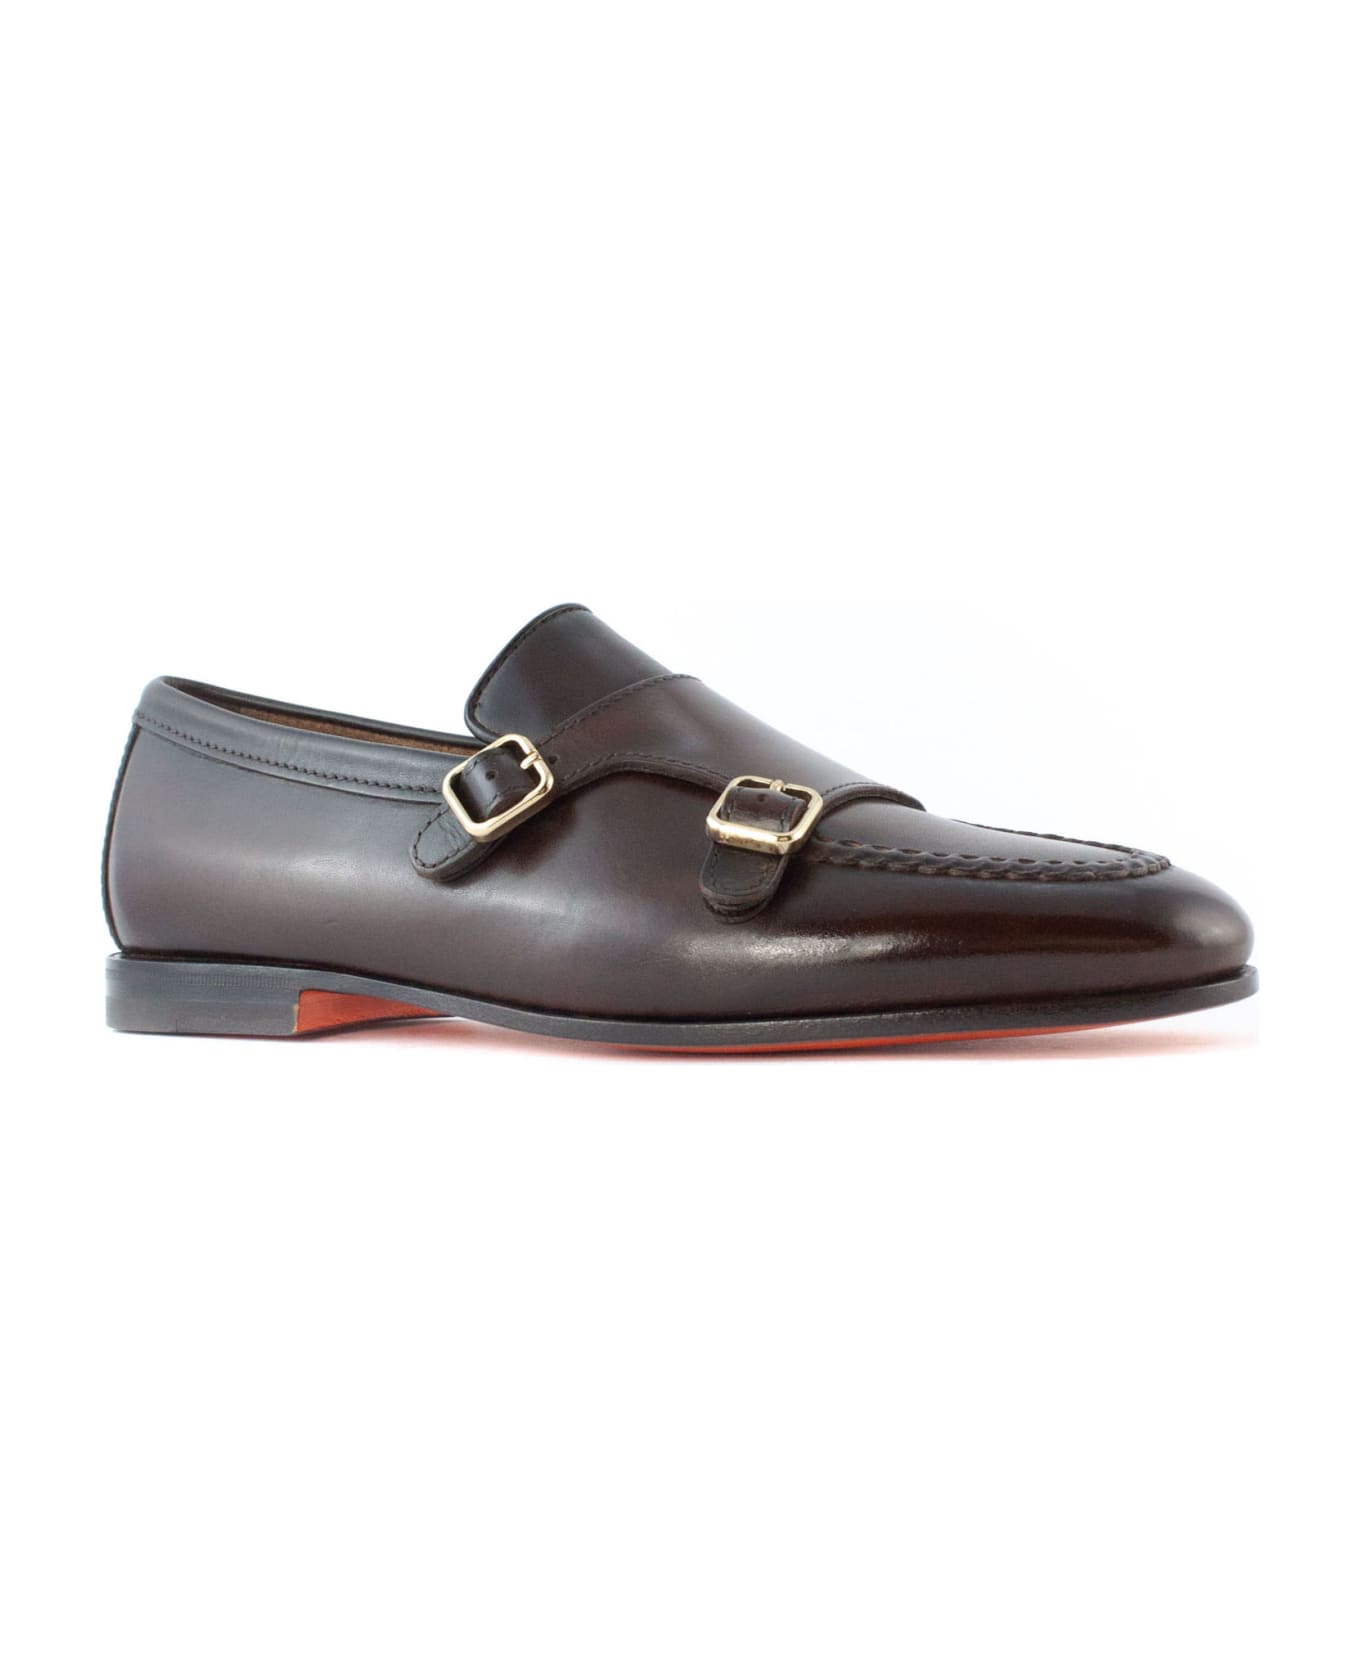 Santoni Brown Leather Double-buckle Loafer - Brown